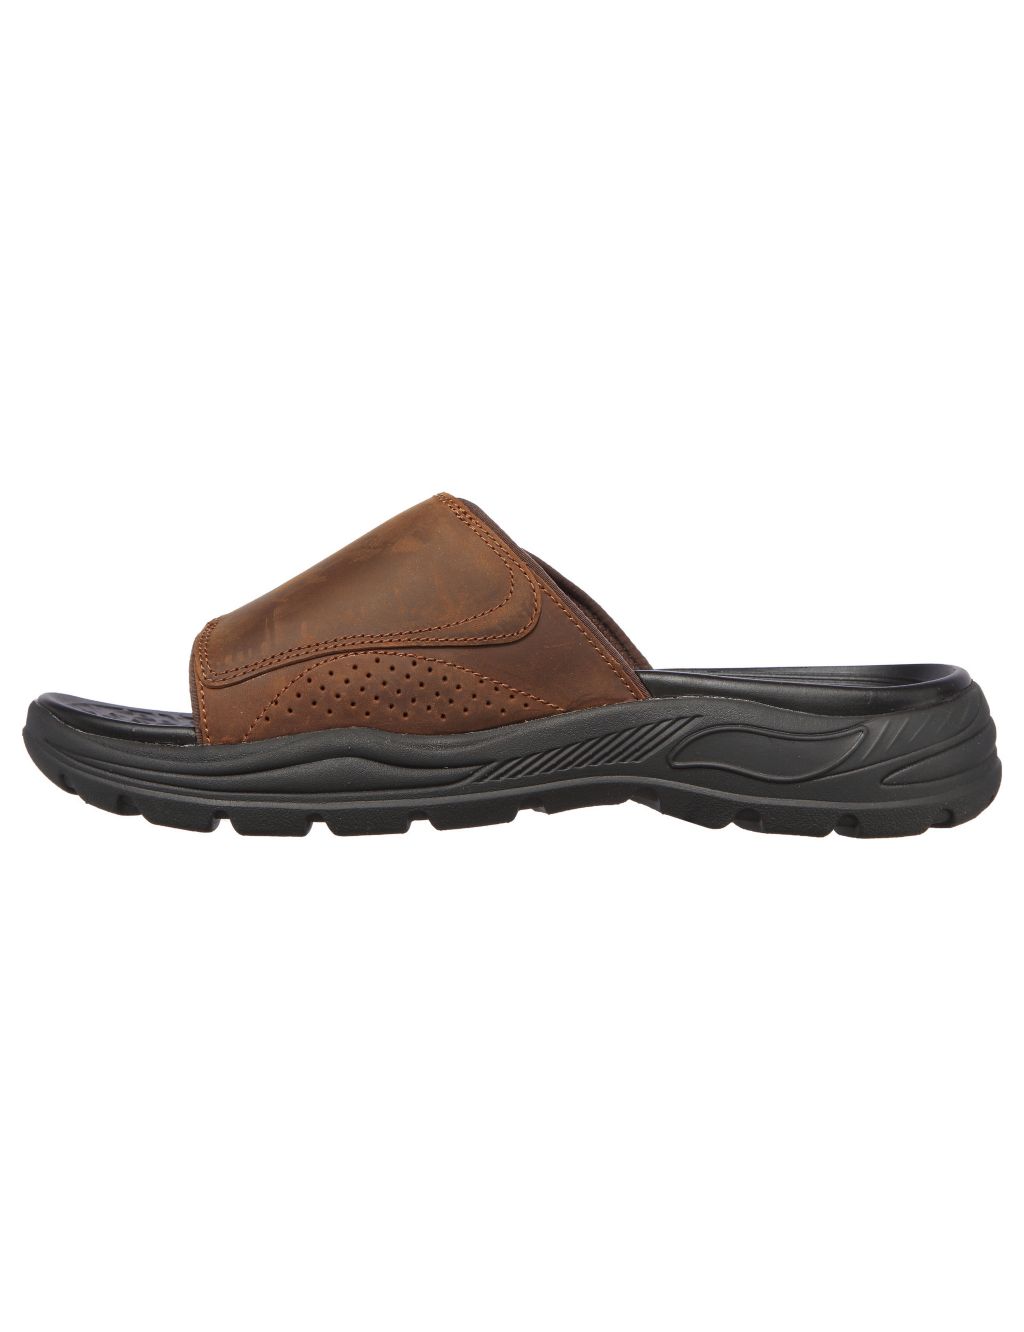 Arch Fit Motley Revelo Leather Sliders image 5